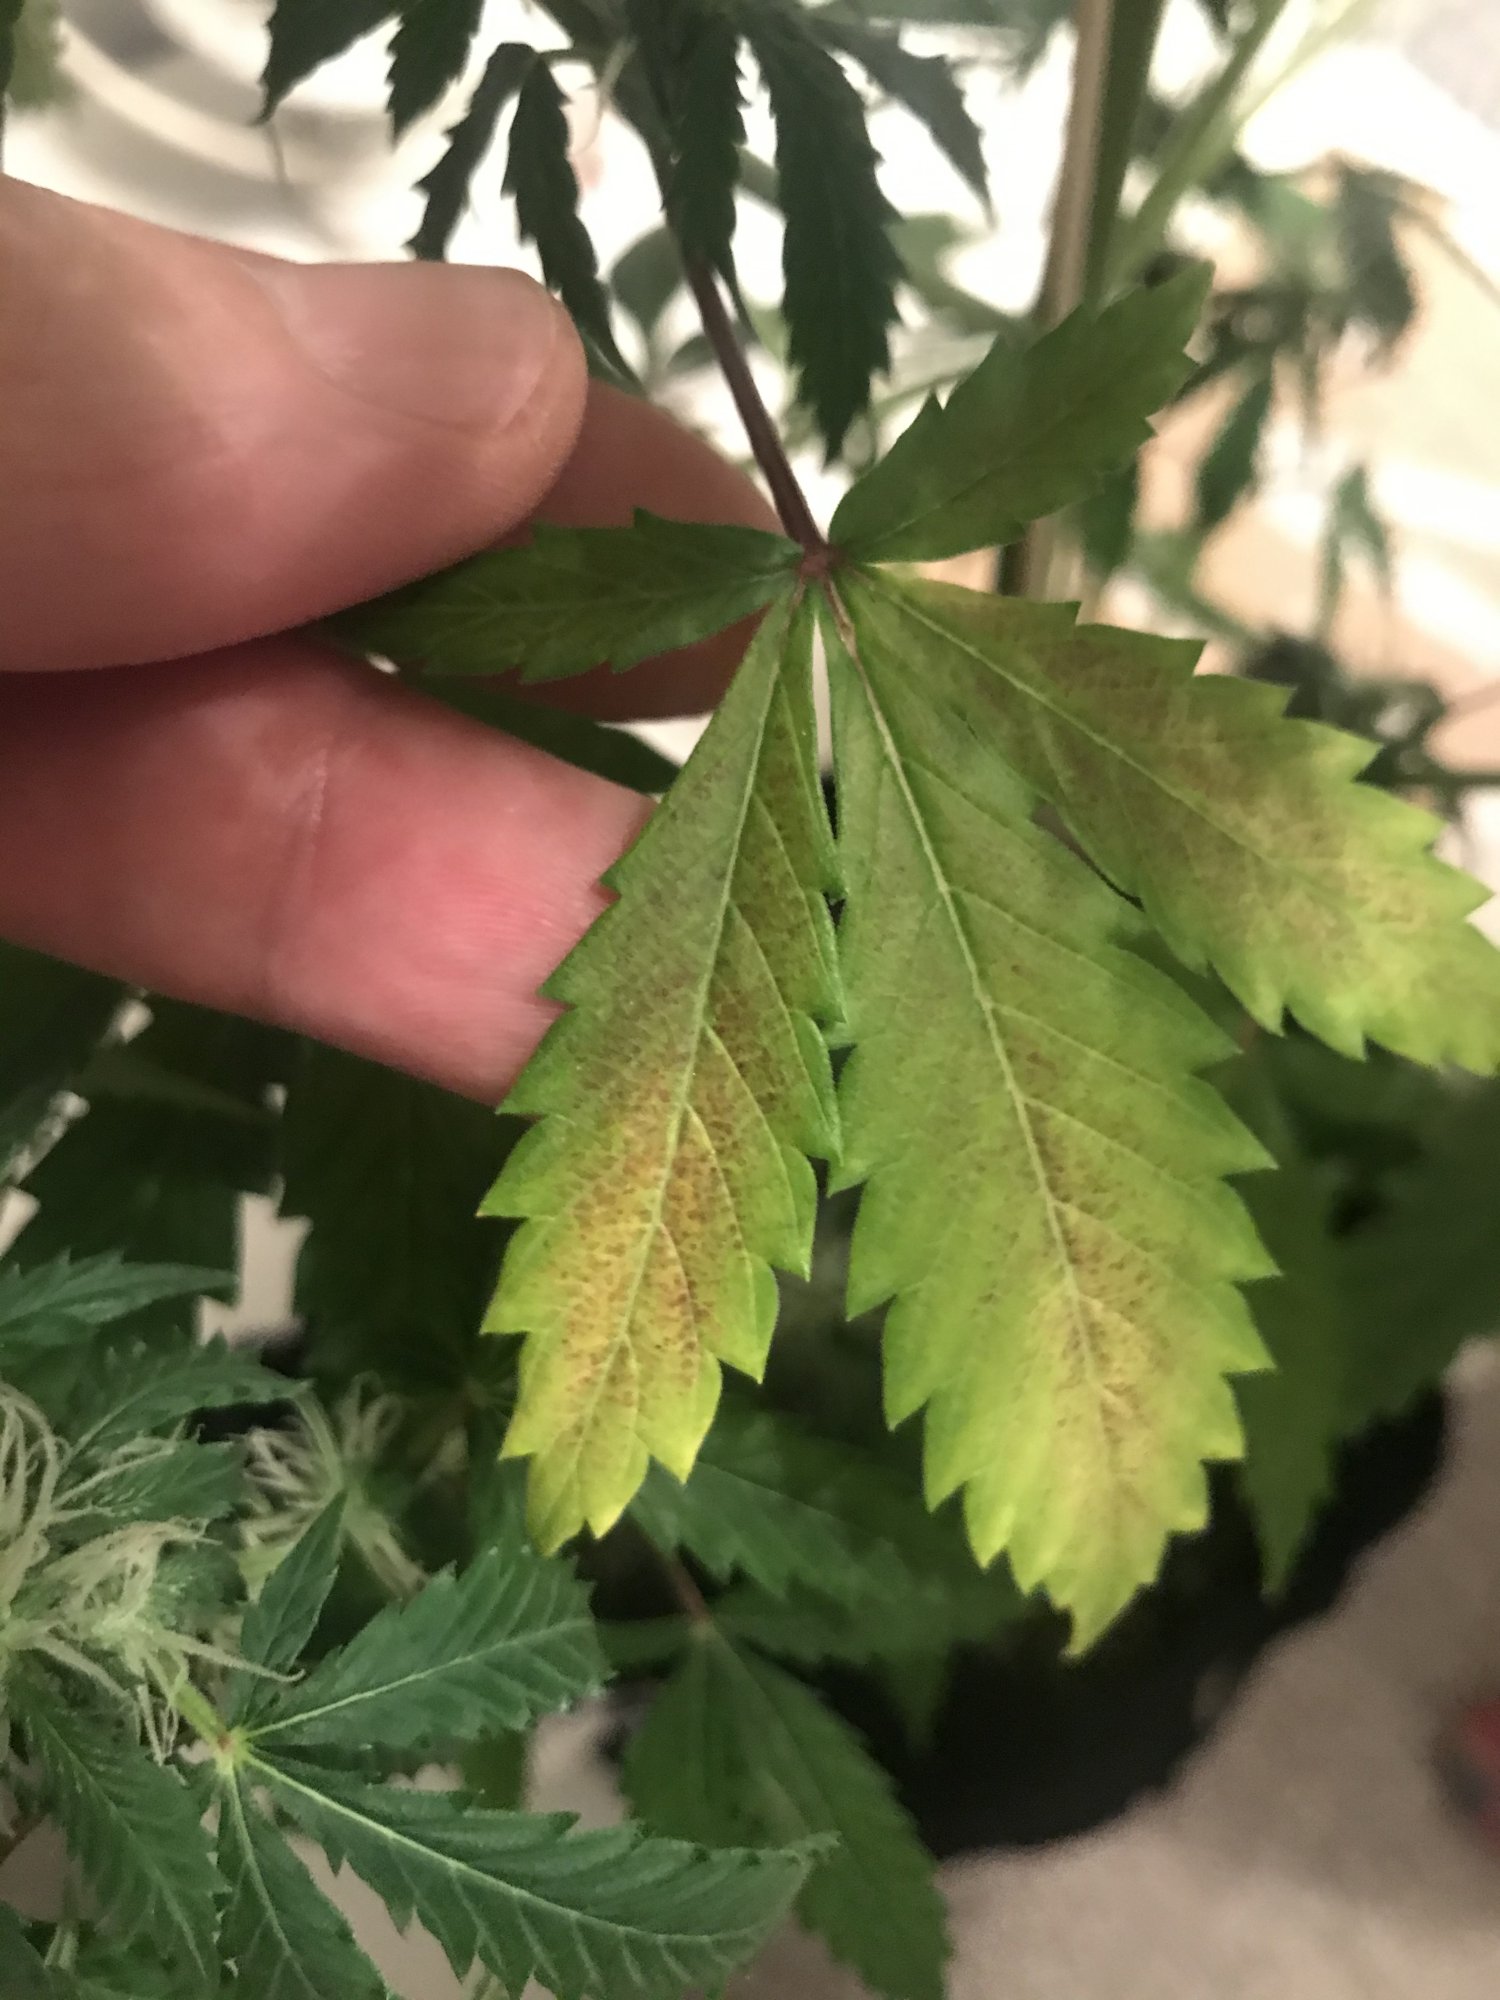 Is it deficiency or excess